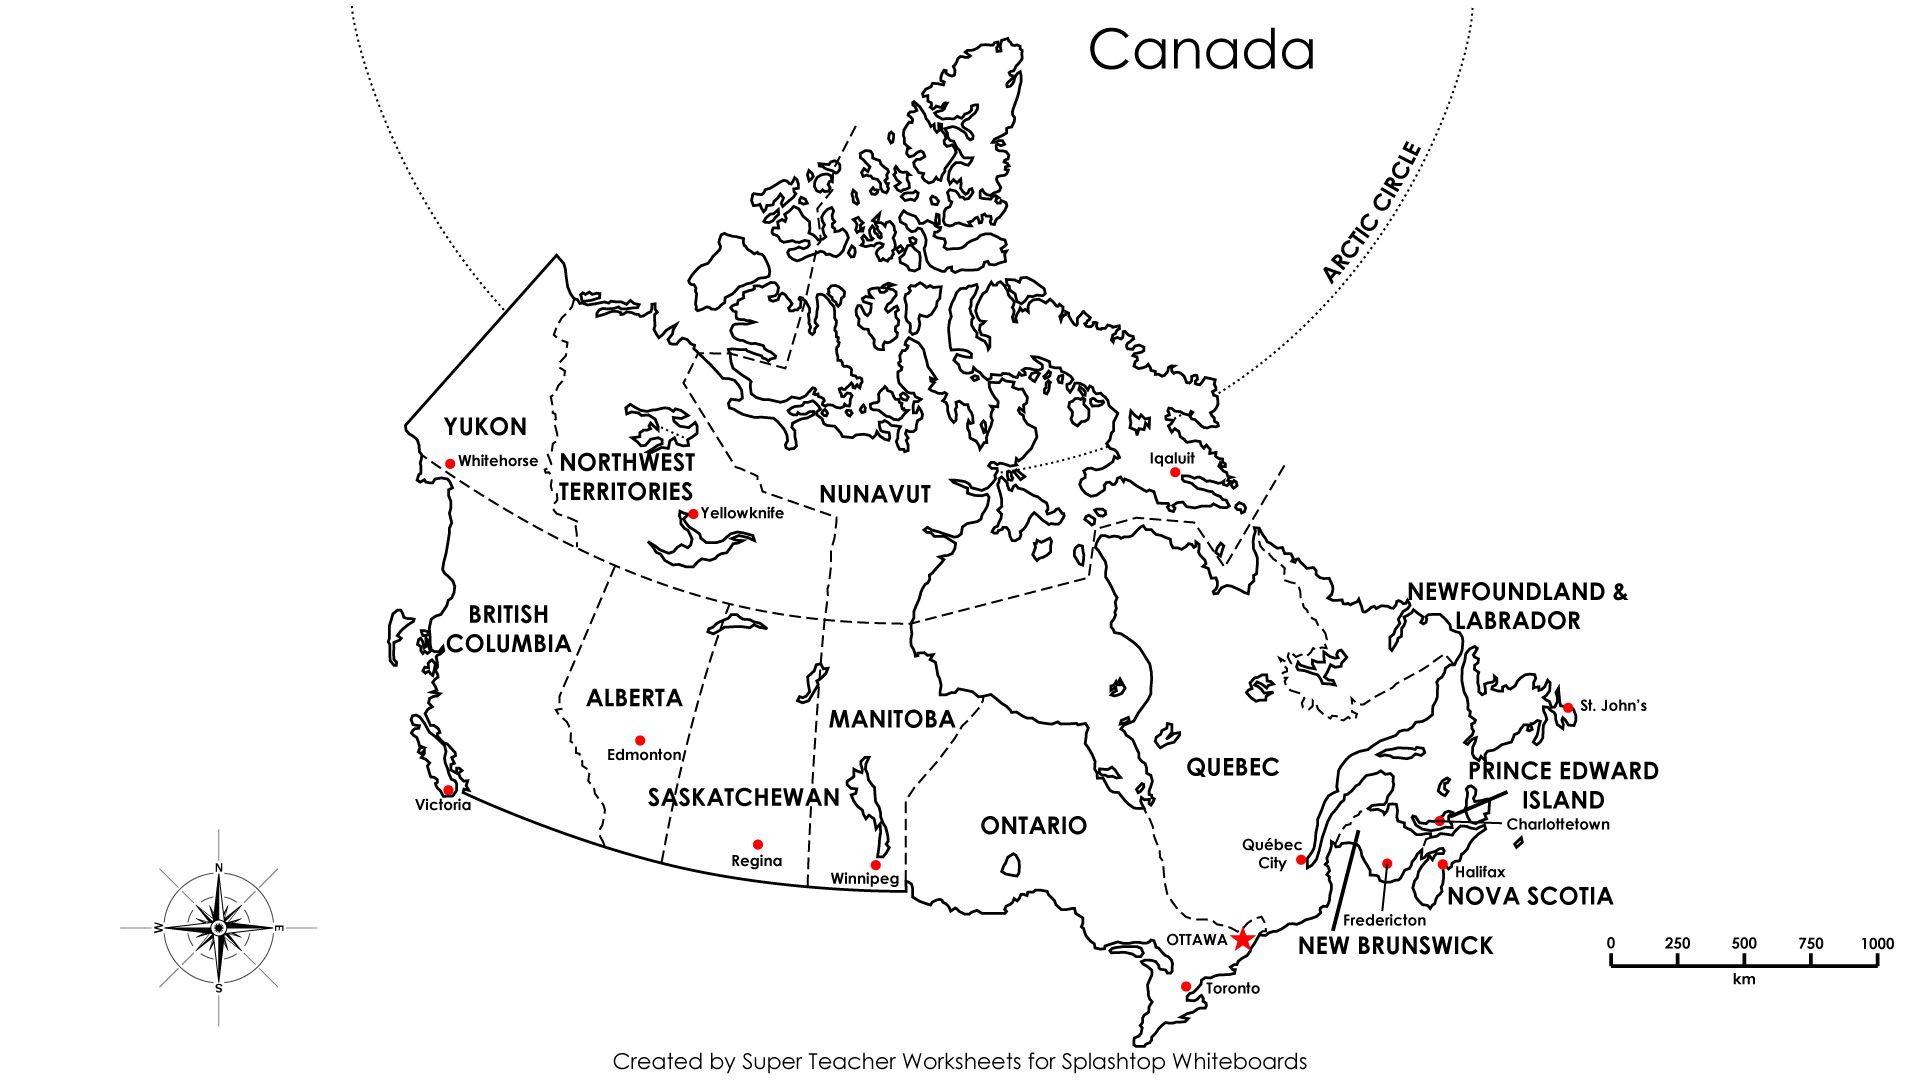 Free Printable Map Canada Provinces Capitals - Google Search - Free Printable Map Of Canada